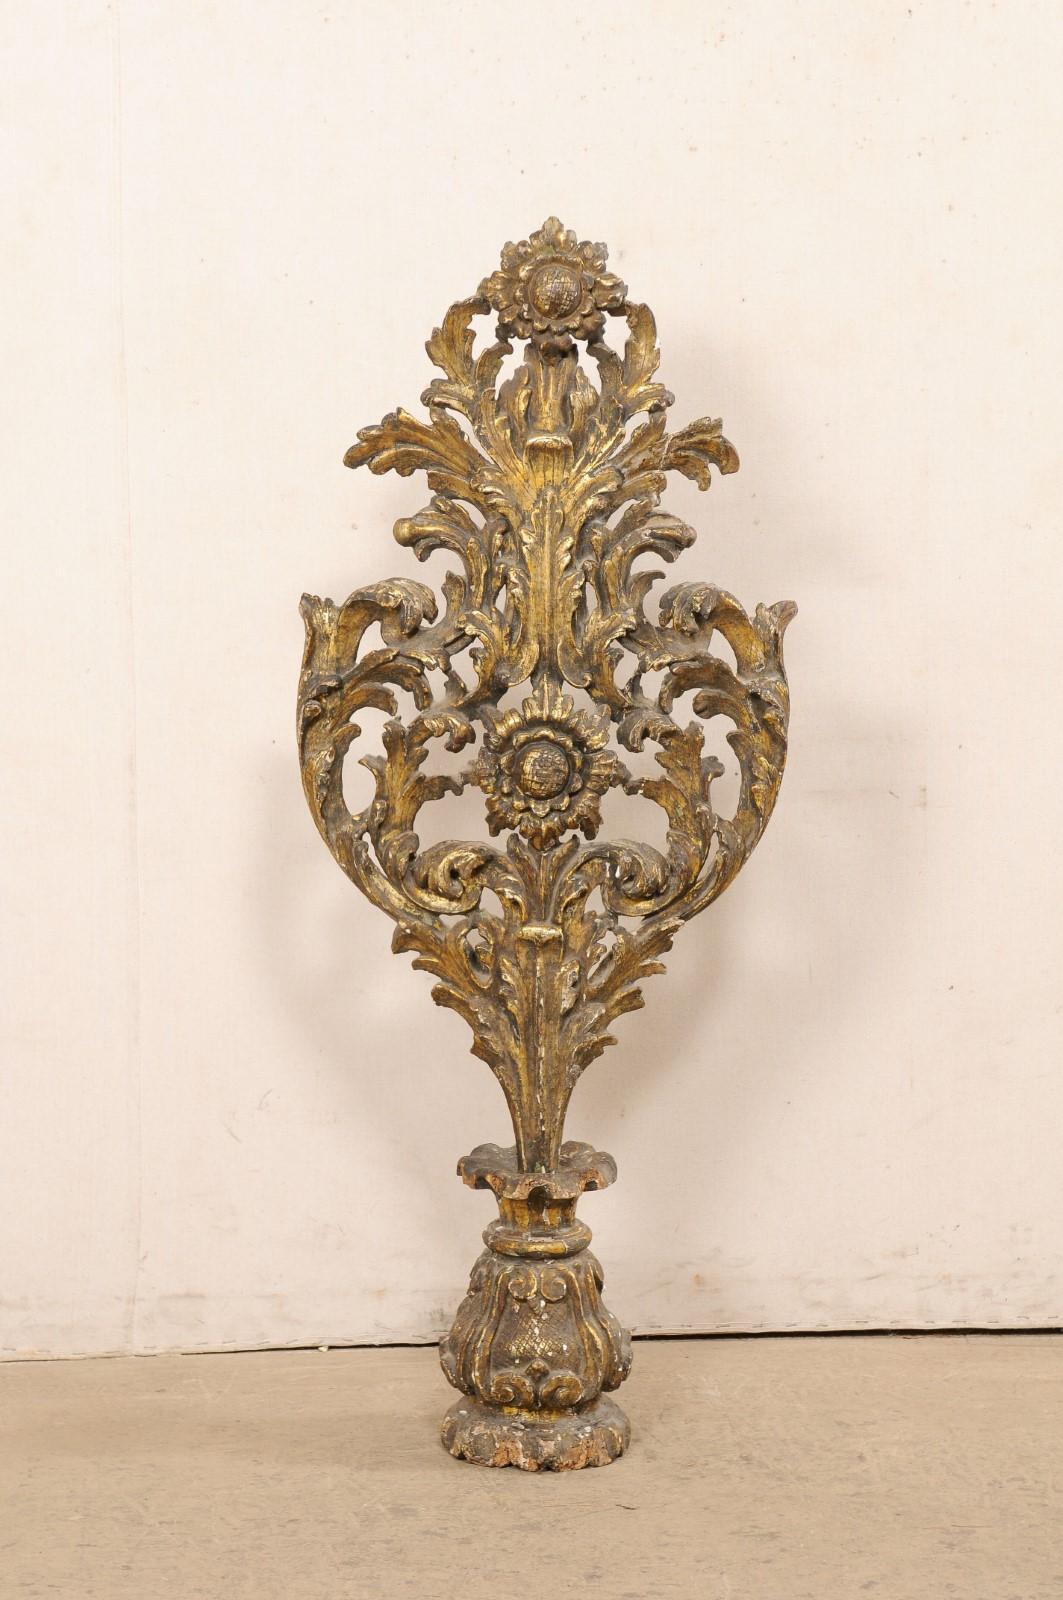 An Italian carved-wood monumental finial, with its original finish, from the 18th century. This antique fragment from Italy has a shapely body, and has been beautifully pierce-carved with flowing acanthus leaves and sunflowers, that are supported by